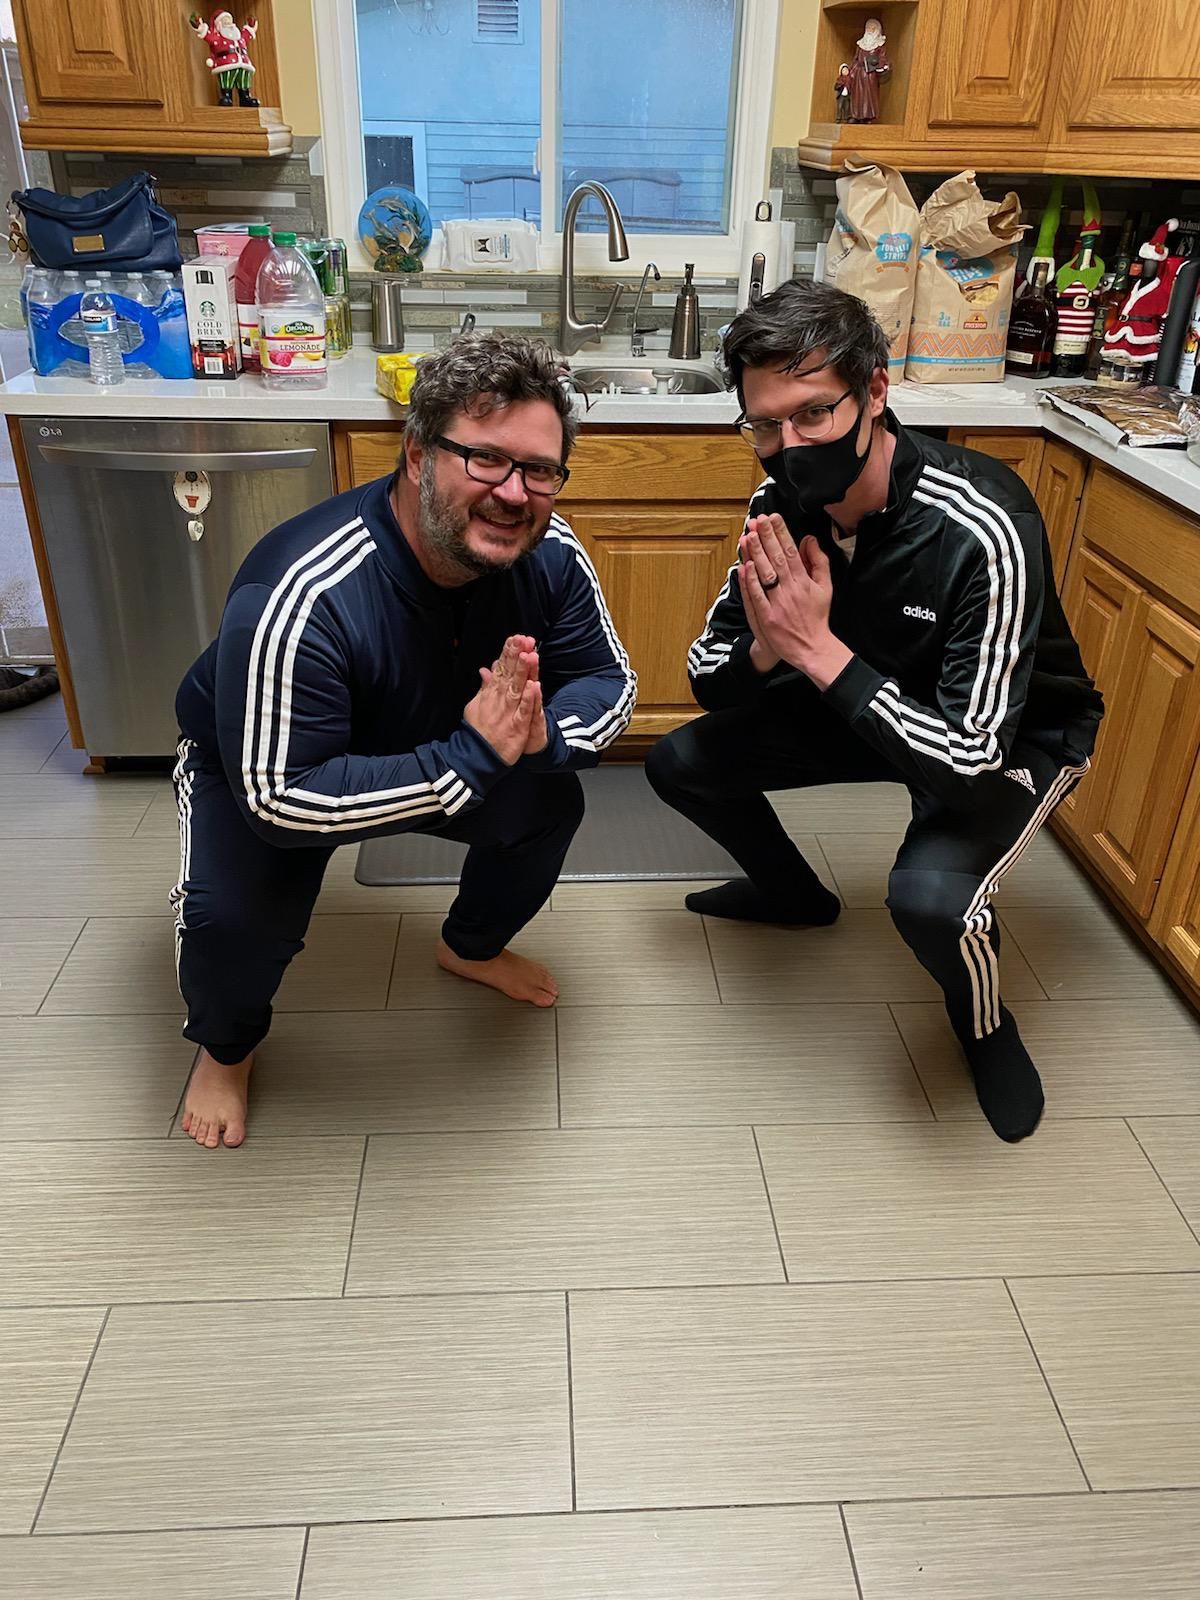 My brother and law and I each got eachother Adidas tracksuits for Christmas.